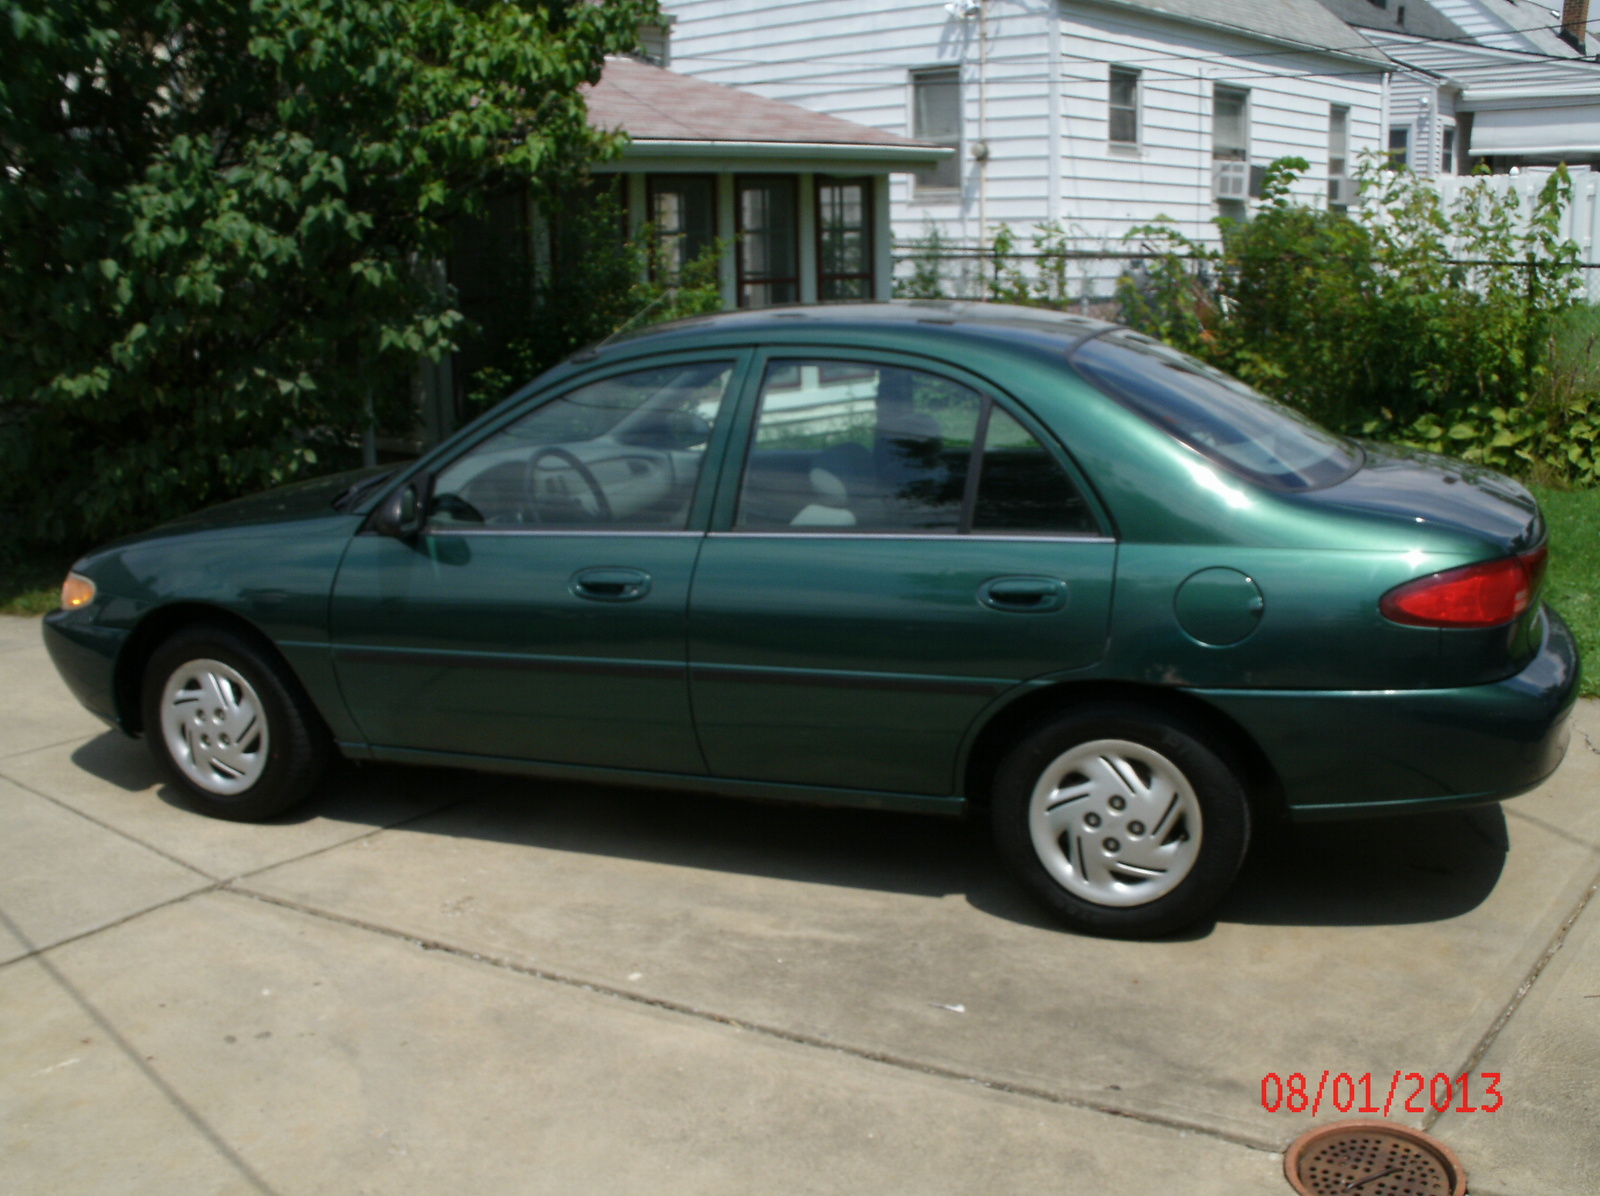 1999 Ford escort lx pictures